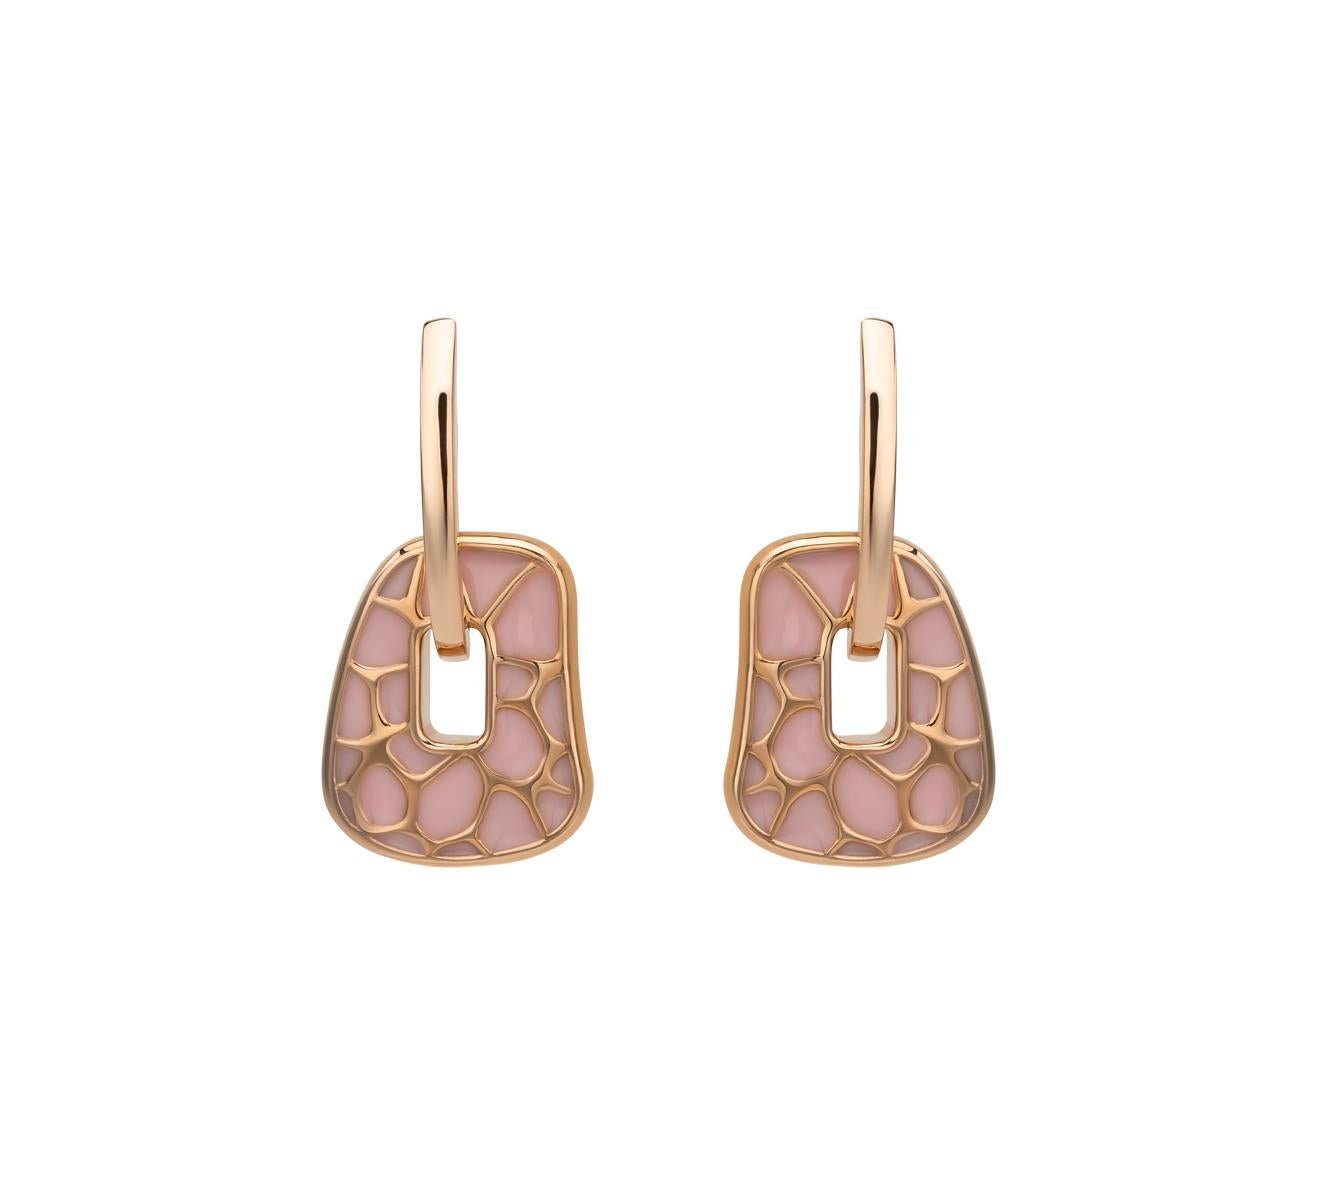 Mattioli Puzzle Safari Small 18K Rose Gold Earrings Pink Enamel and 2 Pendants
Hoops in Rose Gold.
Also available in camel 
Measure 15x18mm or 0,59x0,70 in
Puzzle pendants of mother of pearl you can choose between 25 colour palette

Important